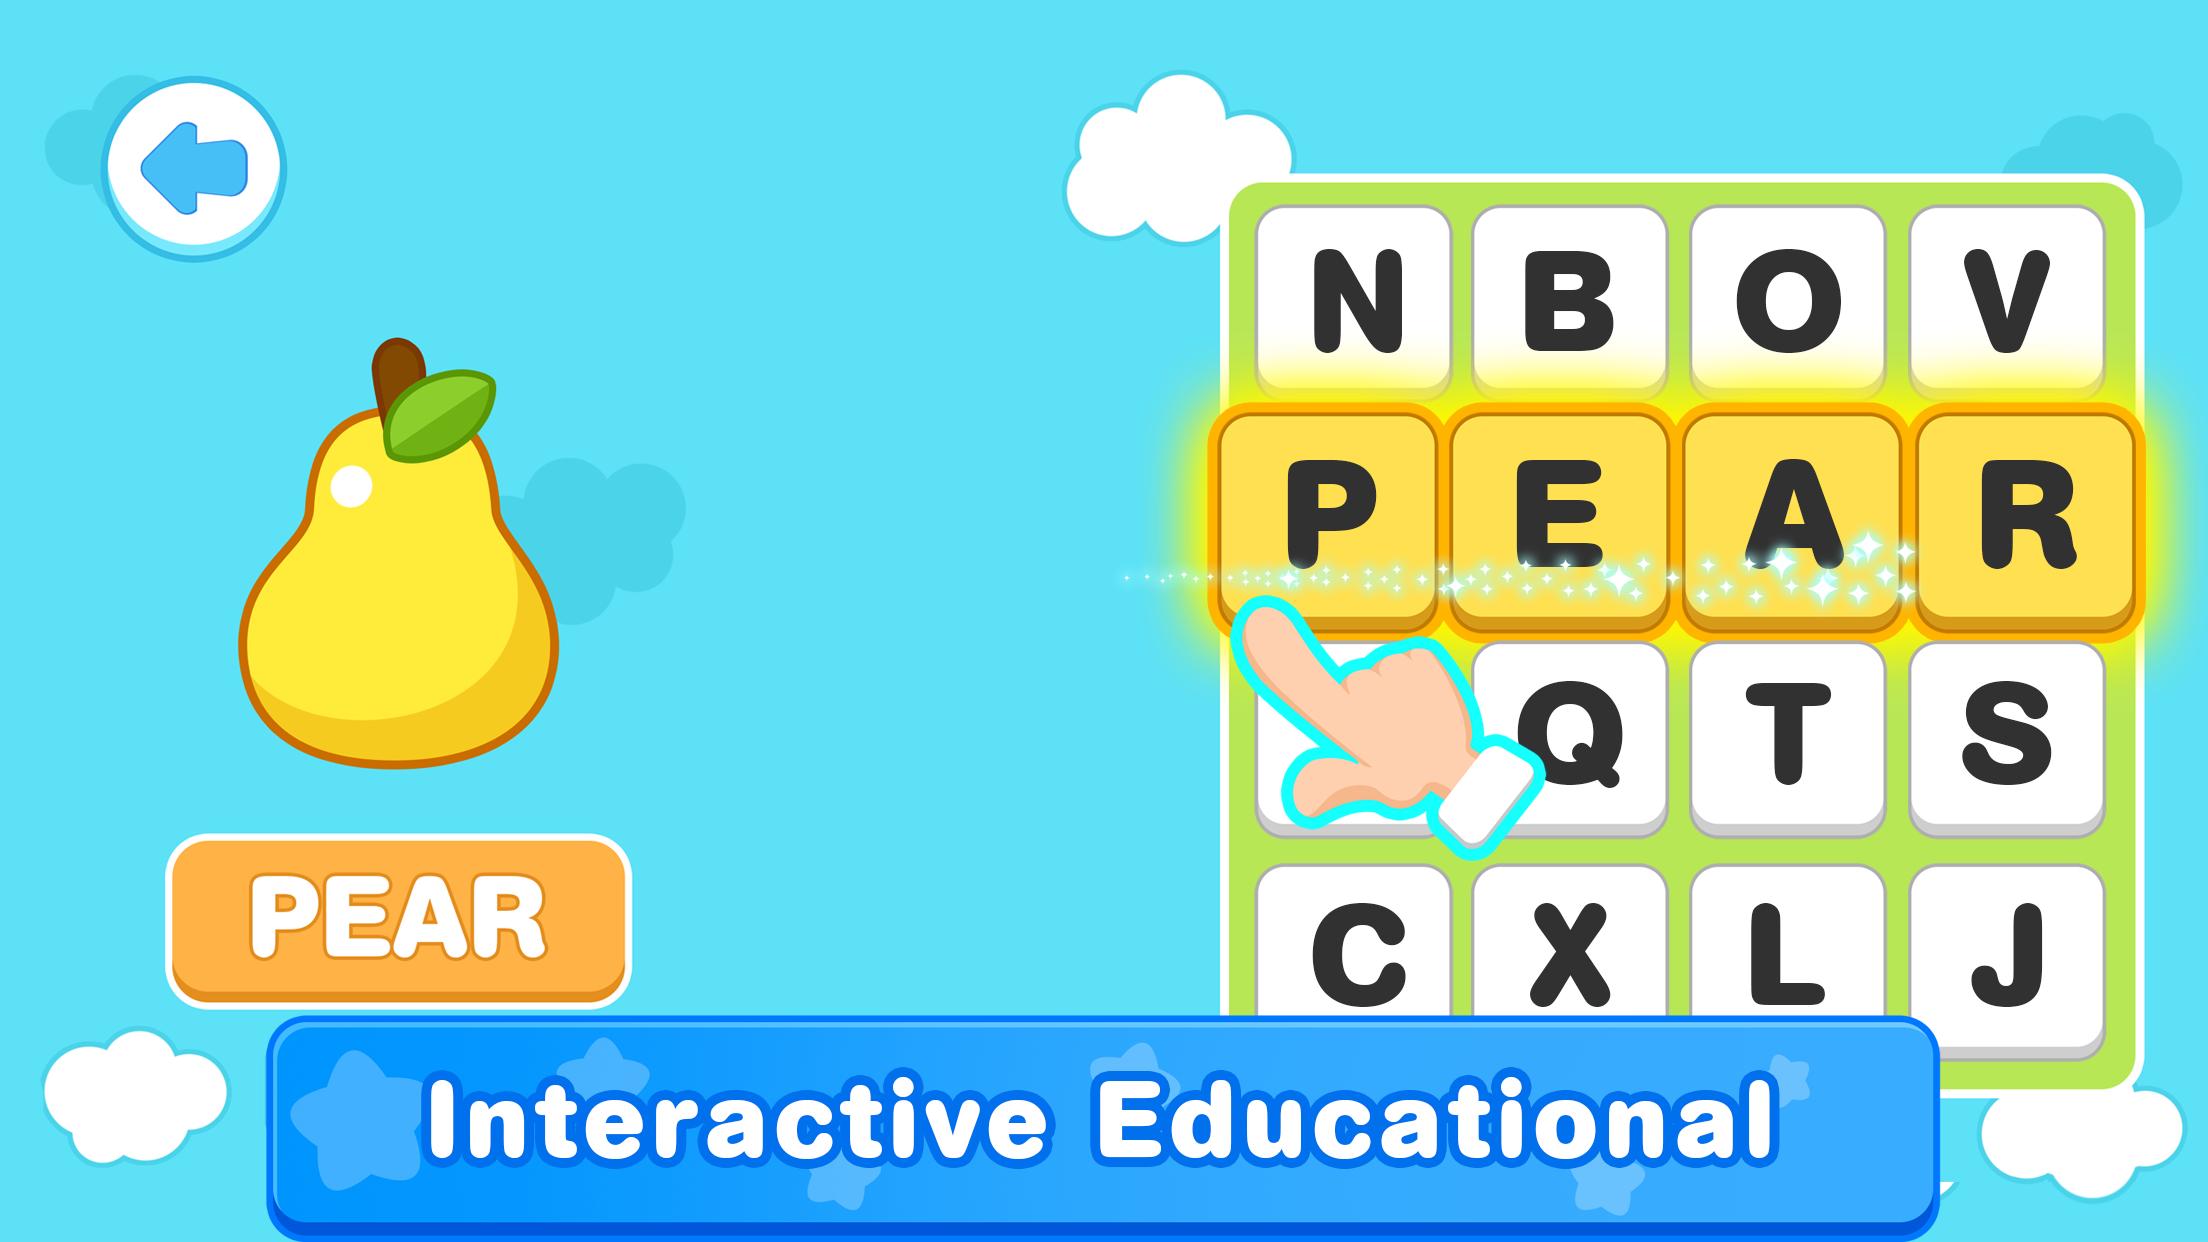 kids-word-search-spelling-games-word-puzzles-apk-for-android-download